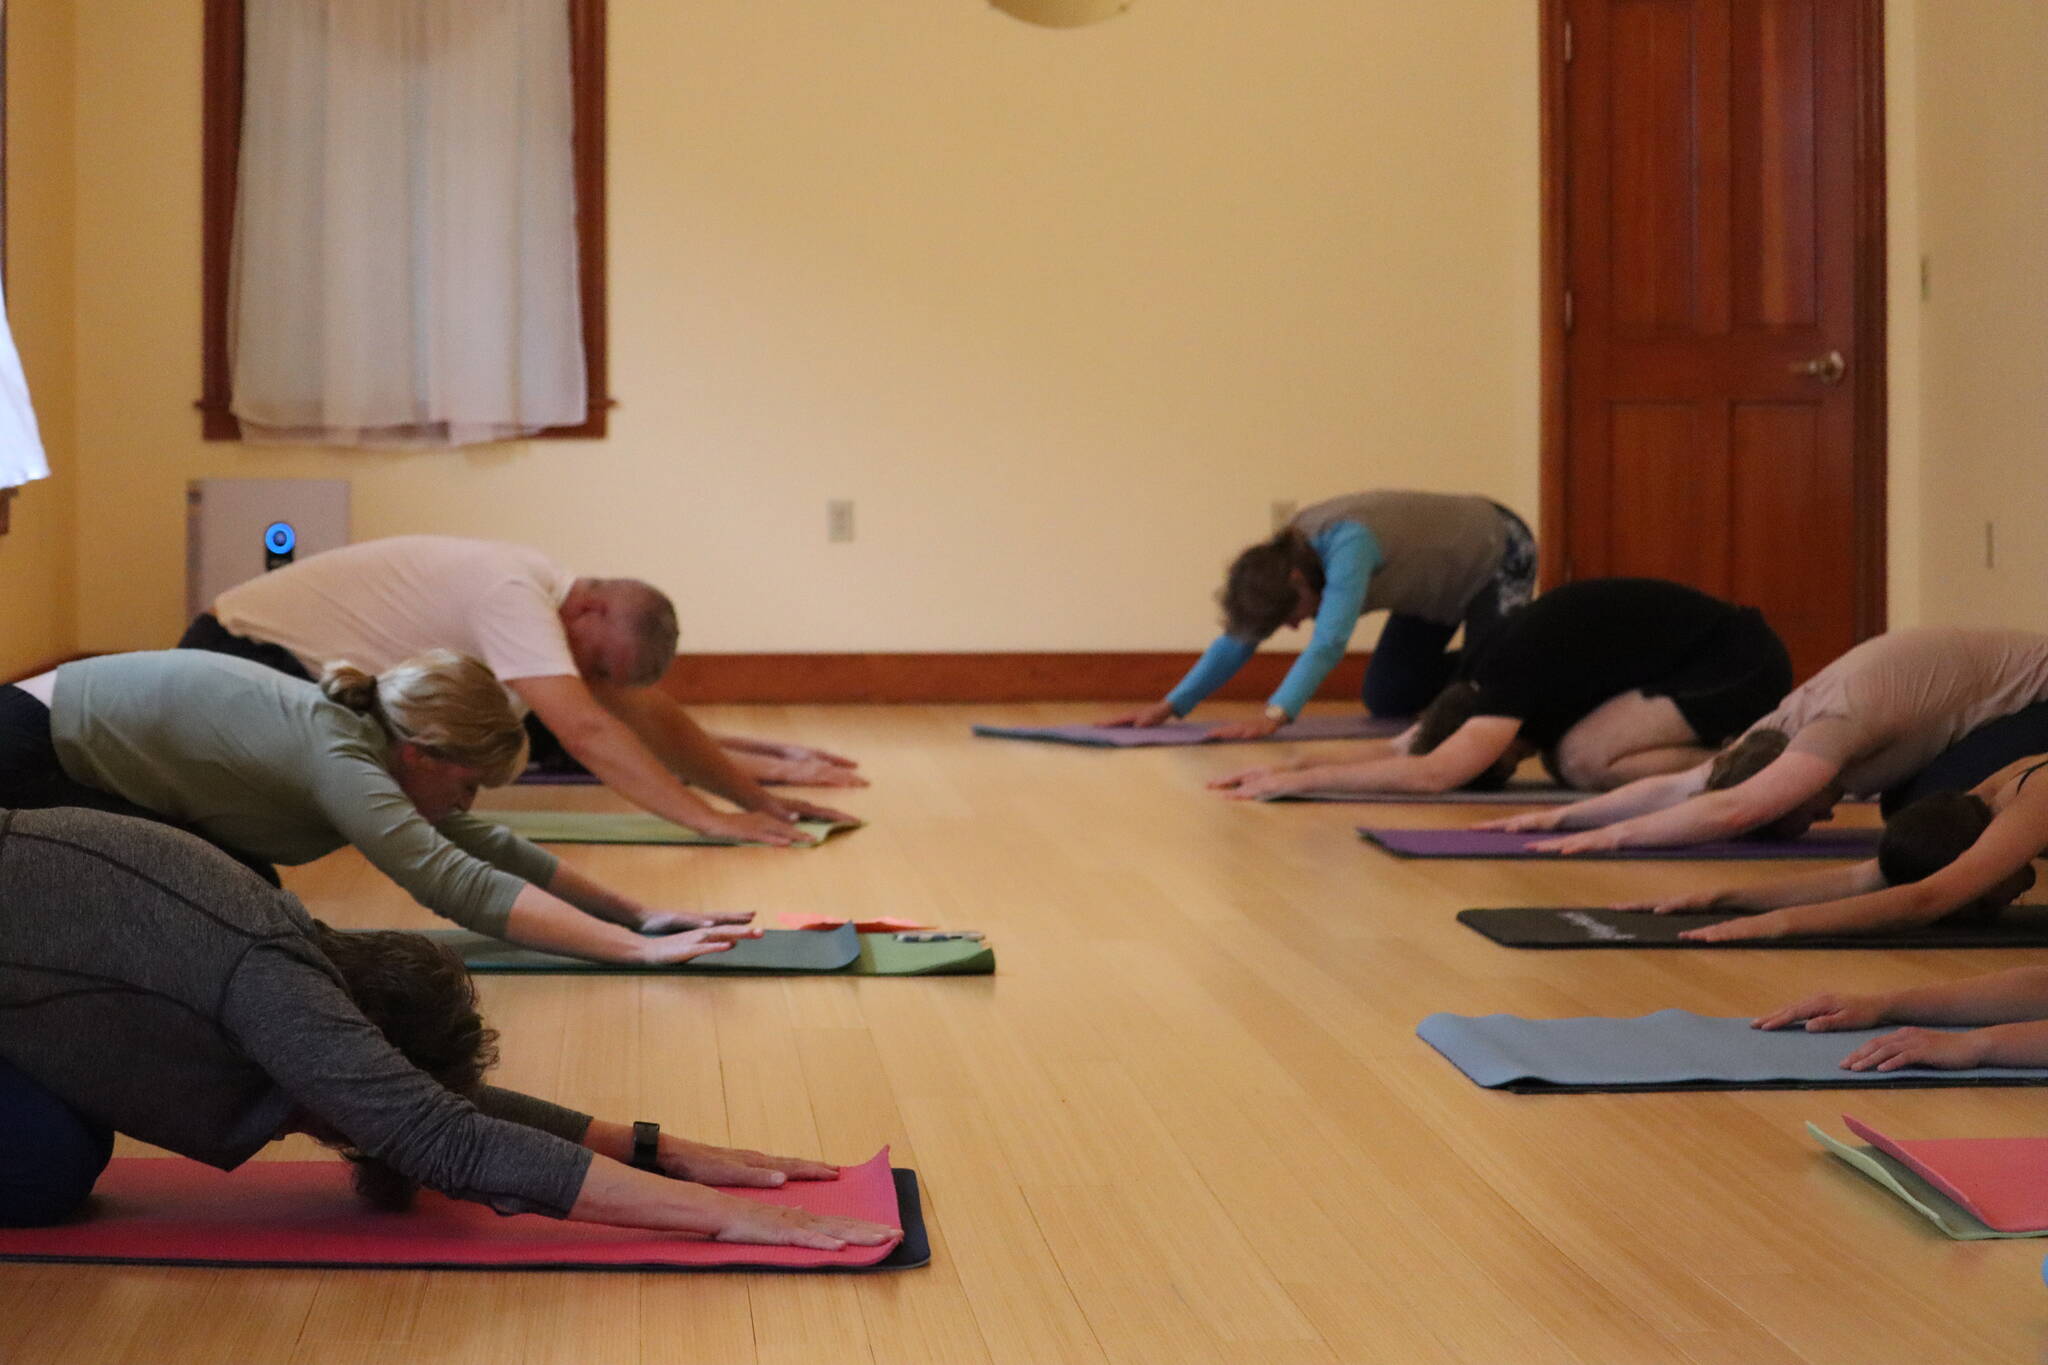 Kristin McTague led a free yoga/pilates class for First Friday at 171 Shattuck Way, suite 202 at Rainforest Yoga. The class incorporated warm ups, classical mat series and cool downs with no props needed. (Jonson Kuhn / Juneau Empire)